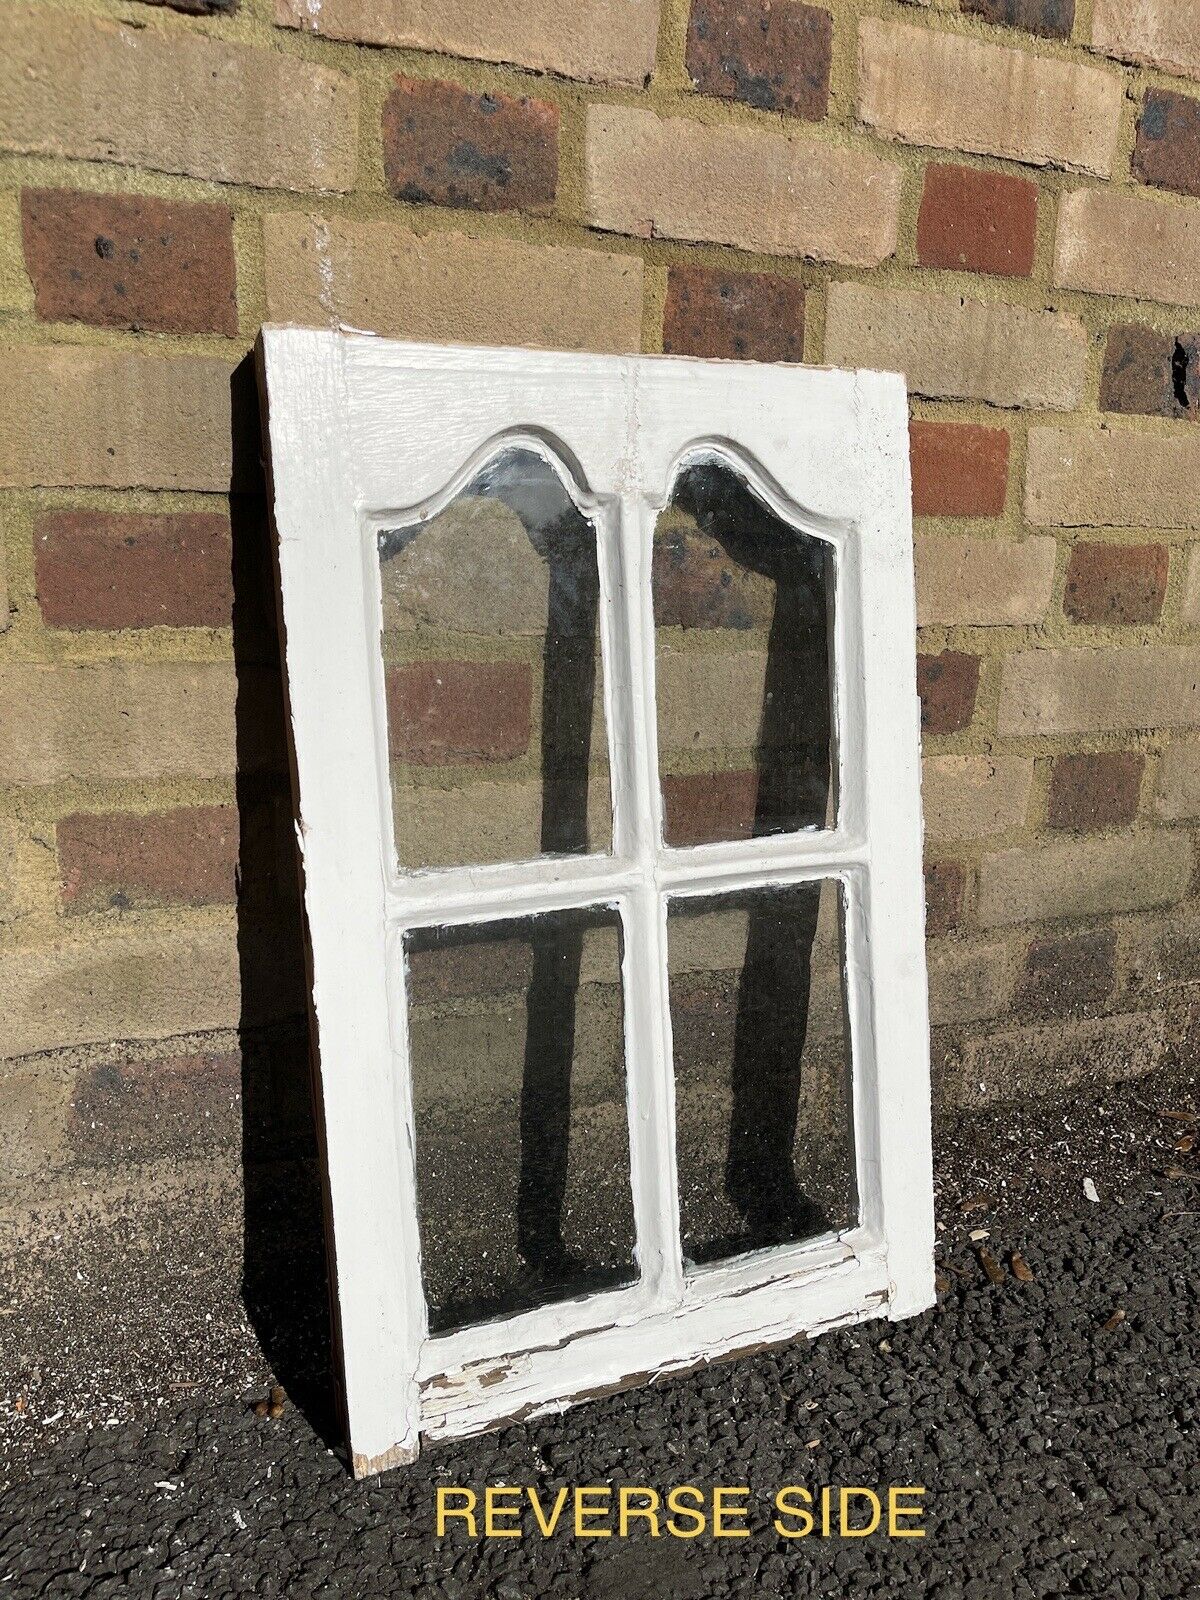 Reclaimed Old Edwardian Arch Sash Wooden Window 605 x 390mm